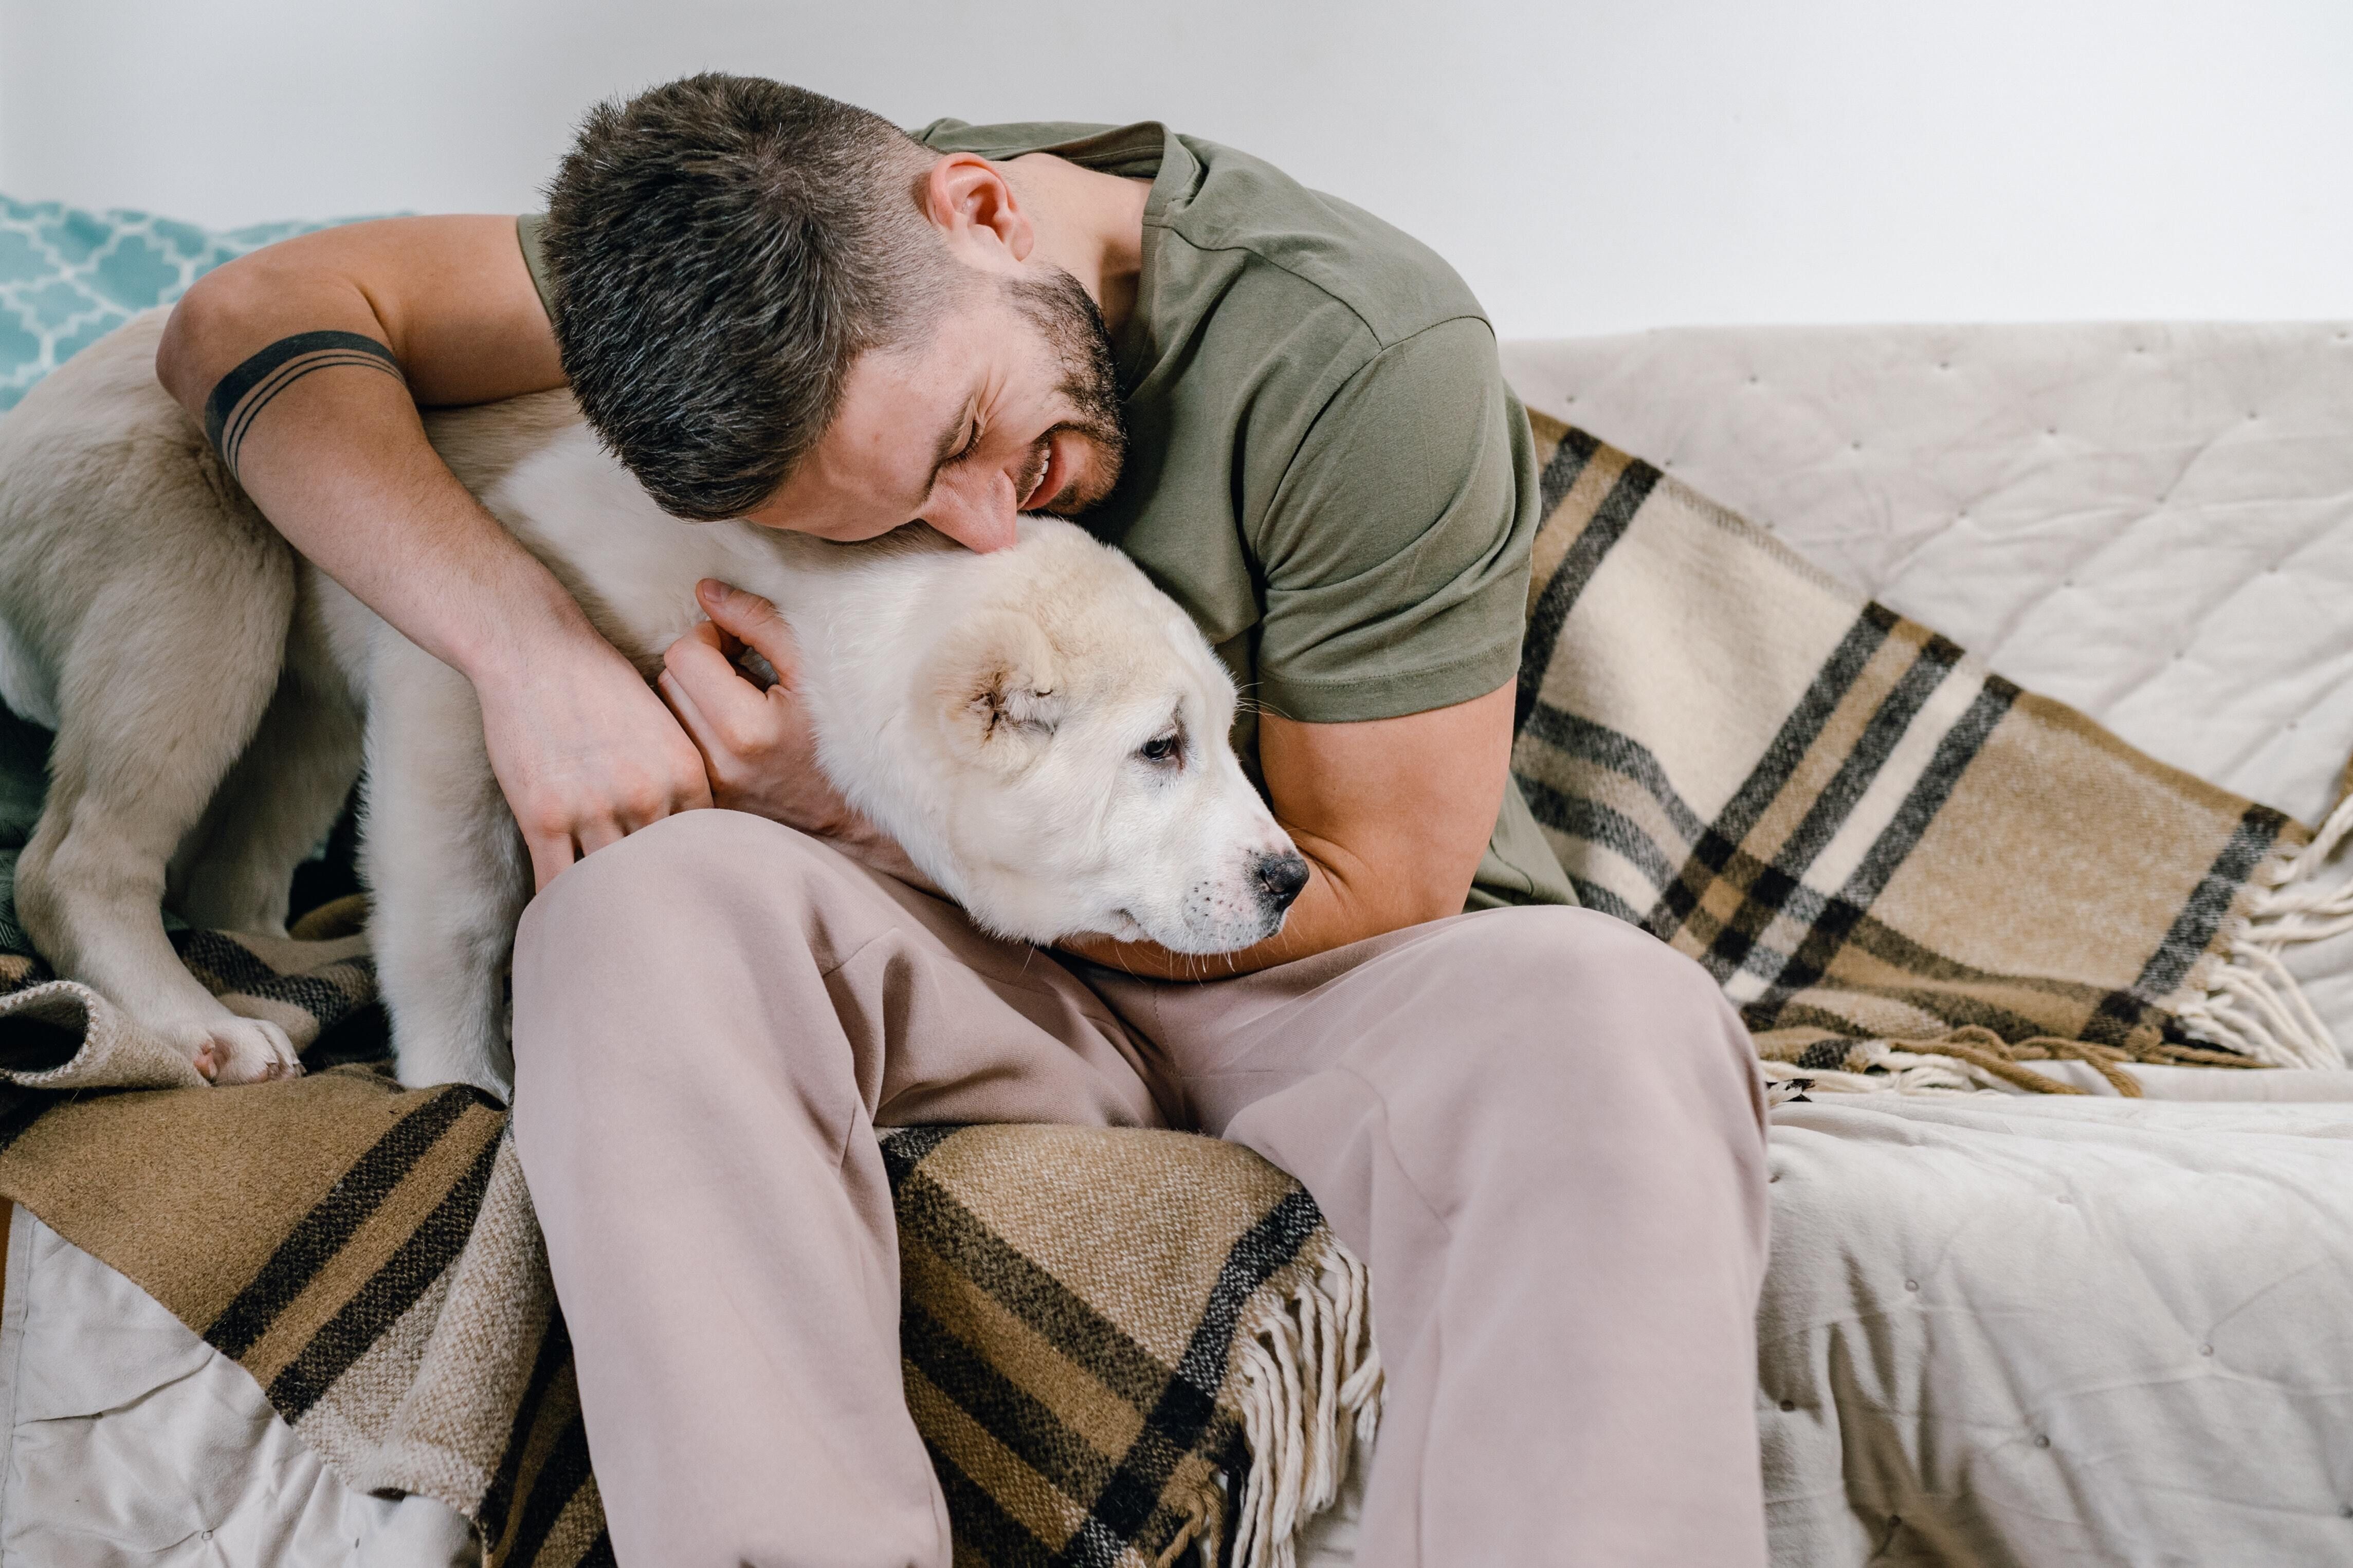 Dogs provide emotional support to people suffering from mental illnesses such as depression, anxiety, and PTSD. They offer unconditional love, comfort, and companionship.